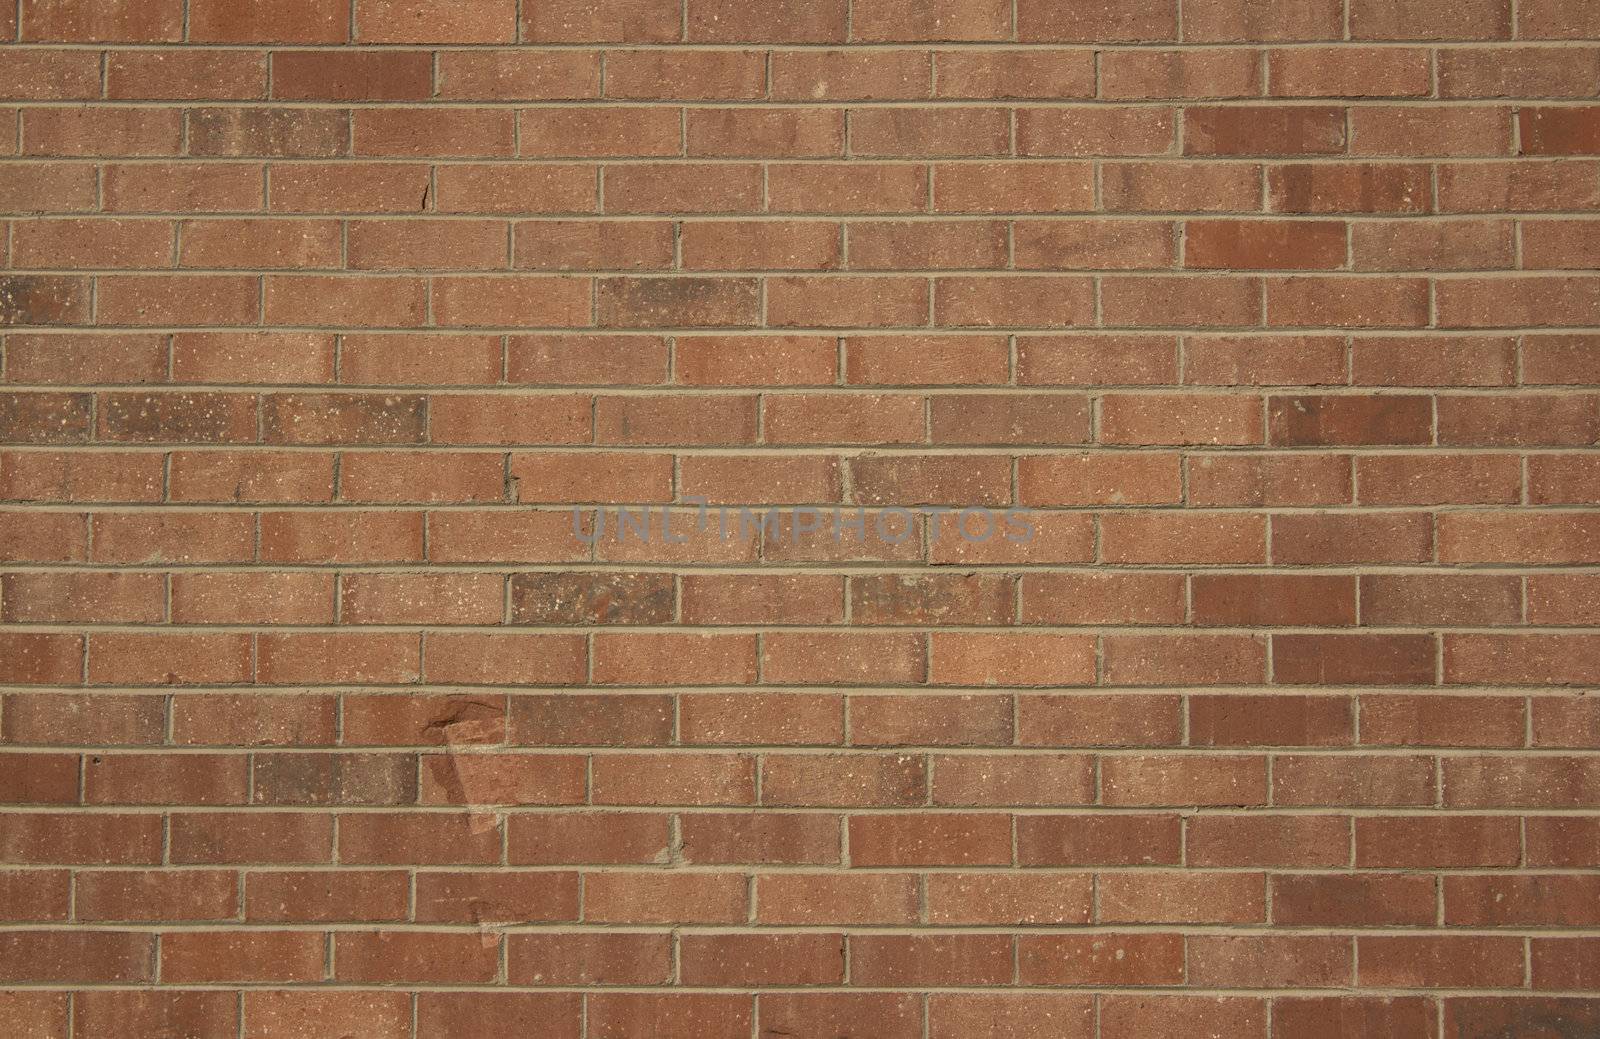 a high quality brick texture. Great for overlays and background textures.